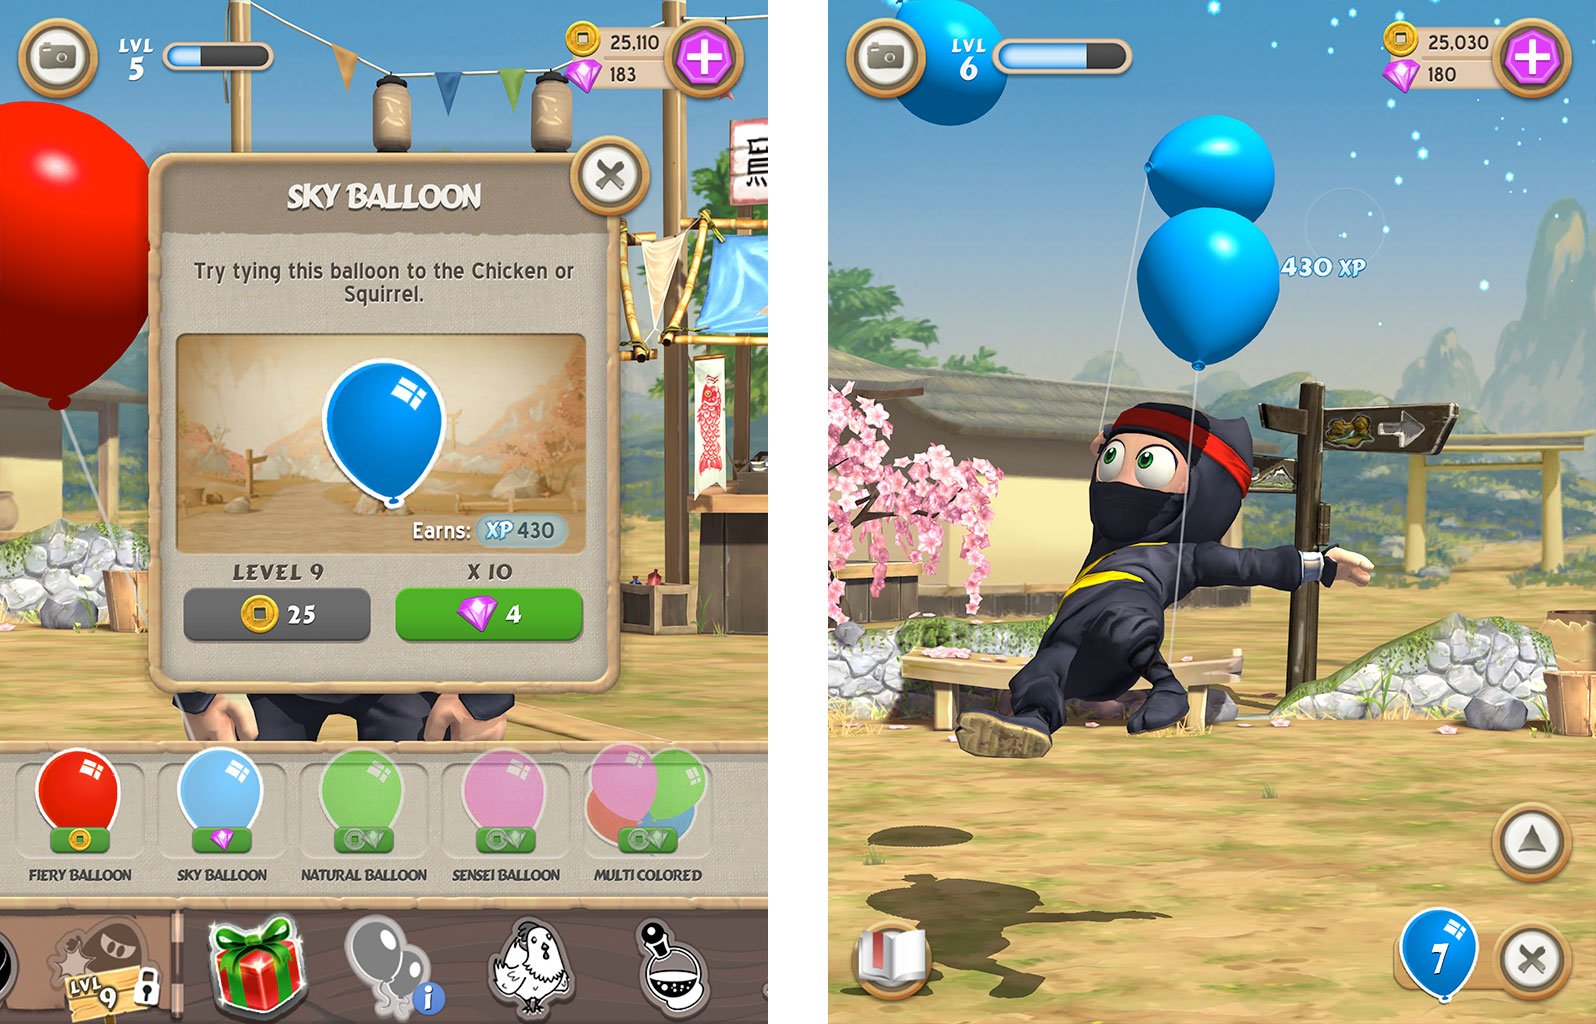 Clumsy Ninja Top 10 tips, tricks, and cheats: Get the blue balloon